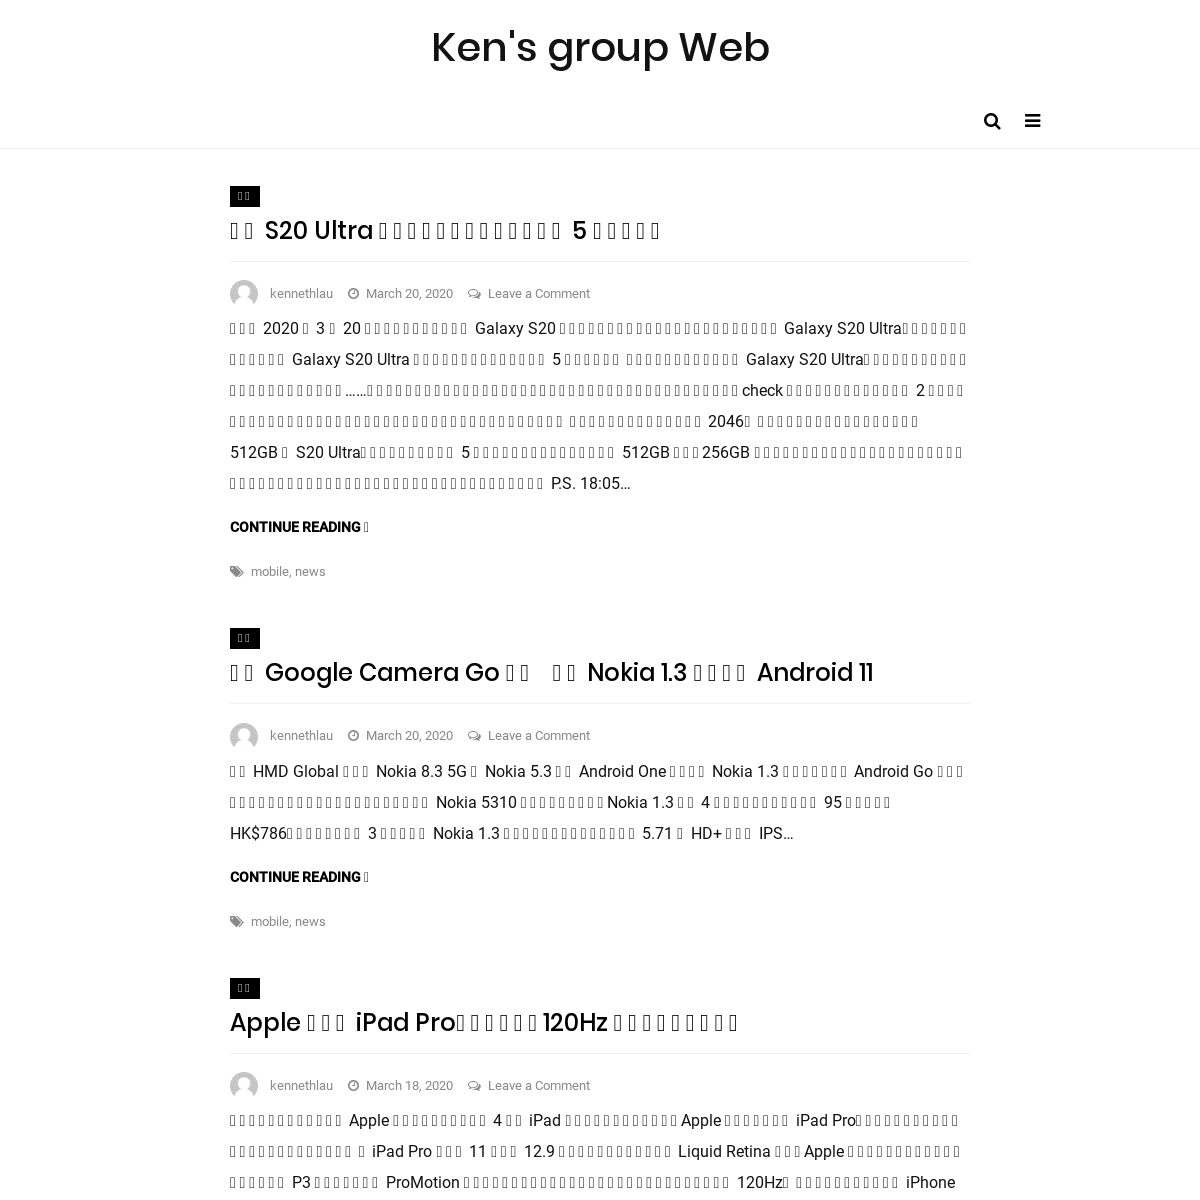 A complete backup of kennethlau.org